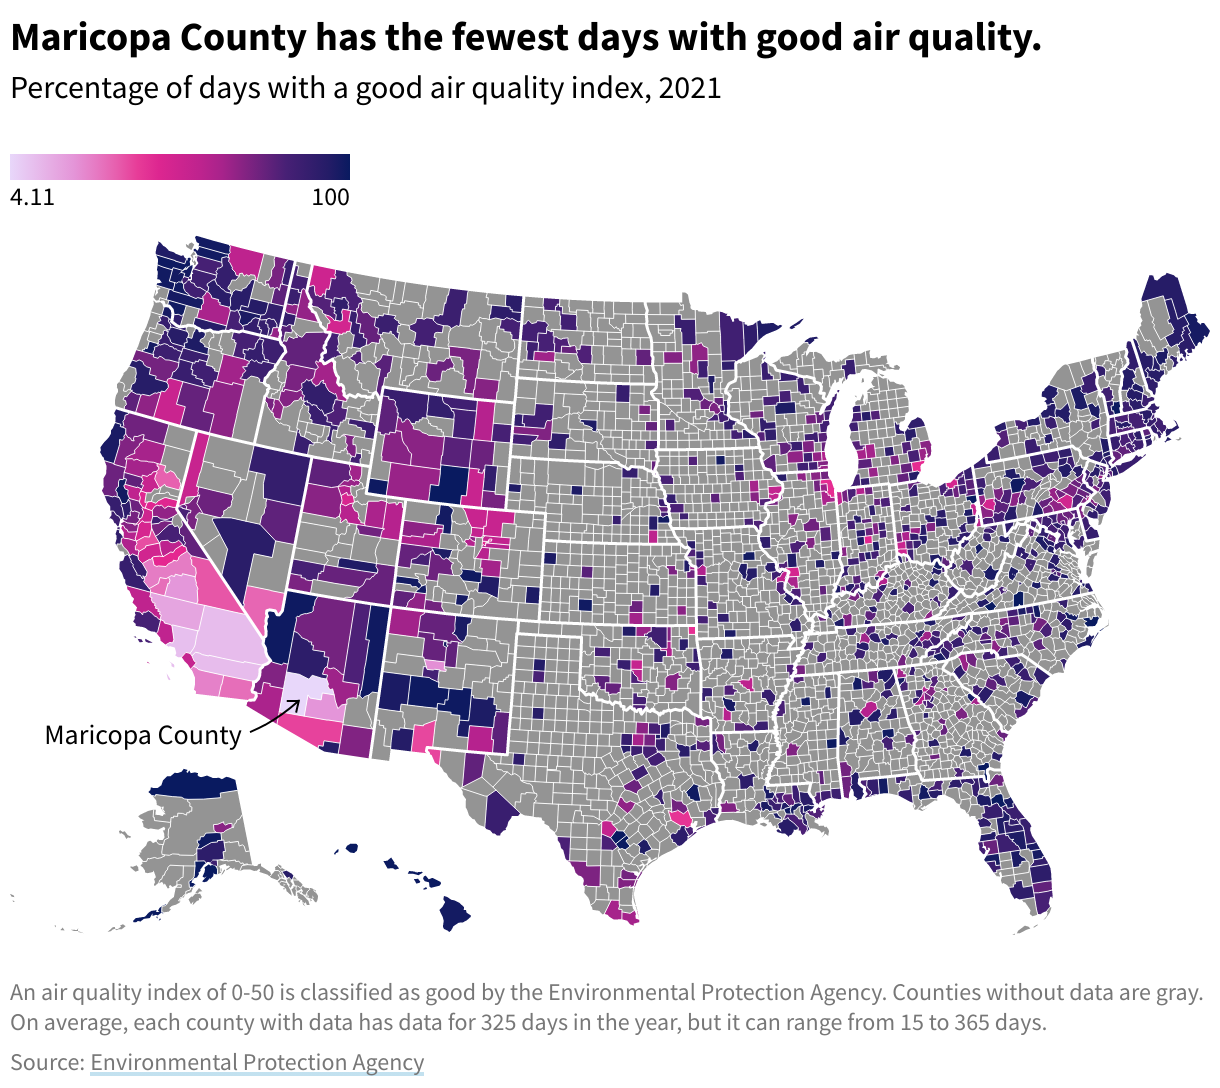 Map of counties colored by % good air quality days. Lots of counties in the middle / south country especially are not colored in. Metros with larger cities tend to have lower percentages. Maricopa has the fewest percentage of good air quality days, in addition to some southern california counties.